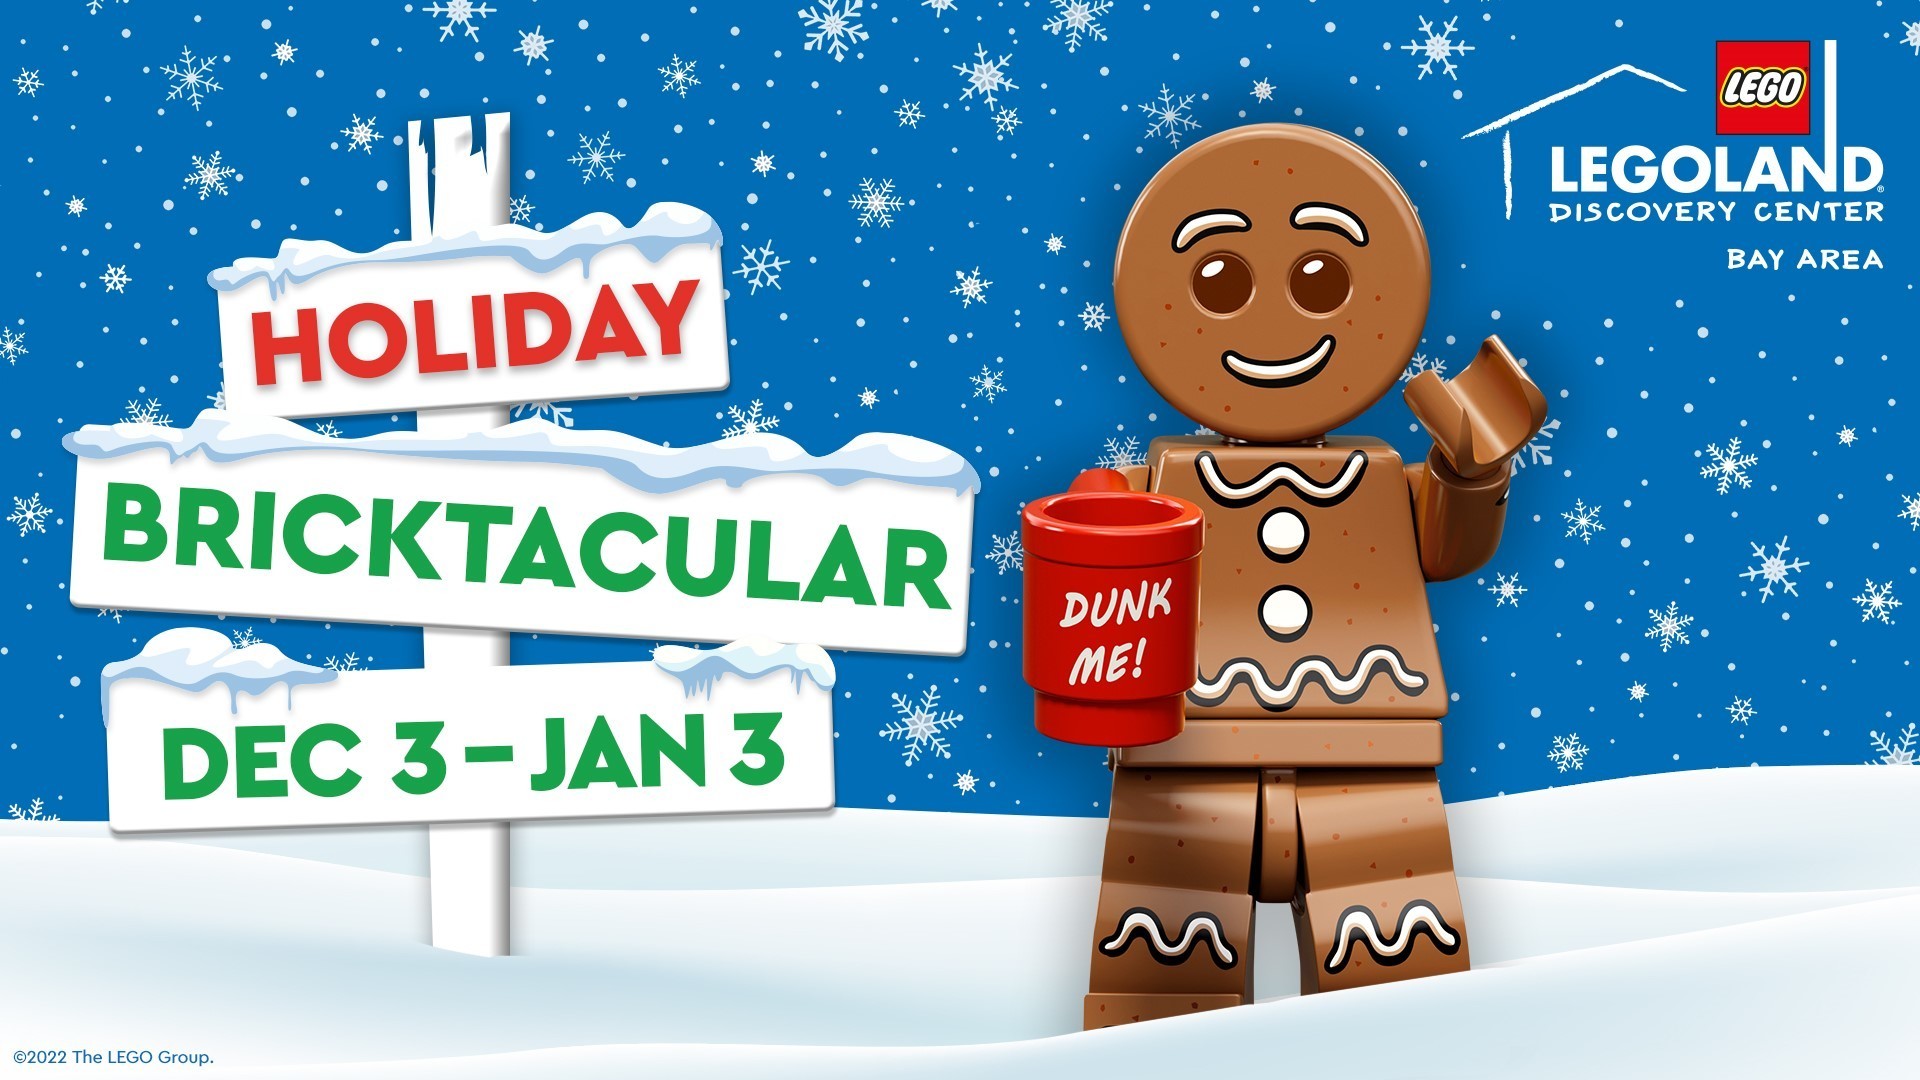 Holiday Bricktacular at LEGOLAND Discovery Center Bay Area from December 3-January 3!, Milpitas, California, United States